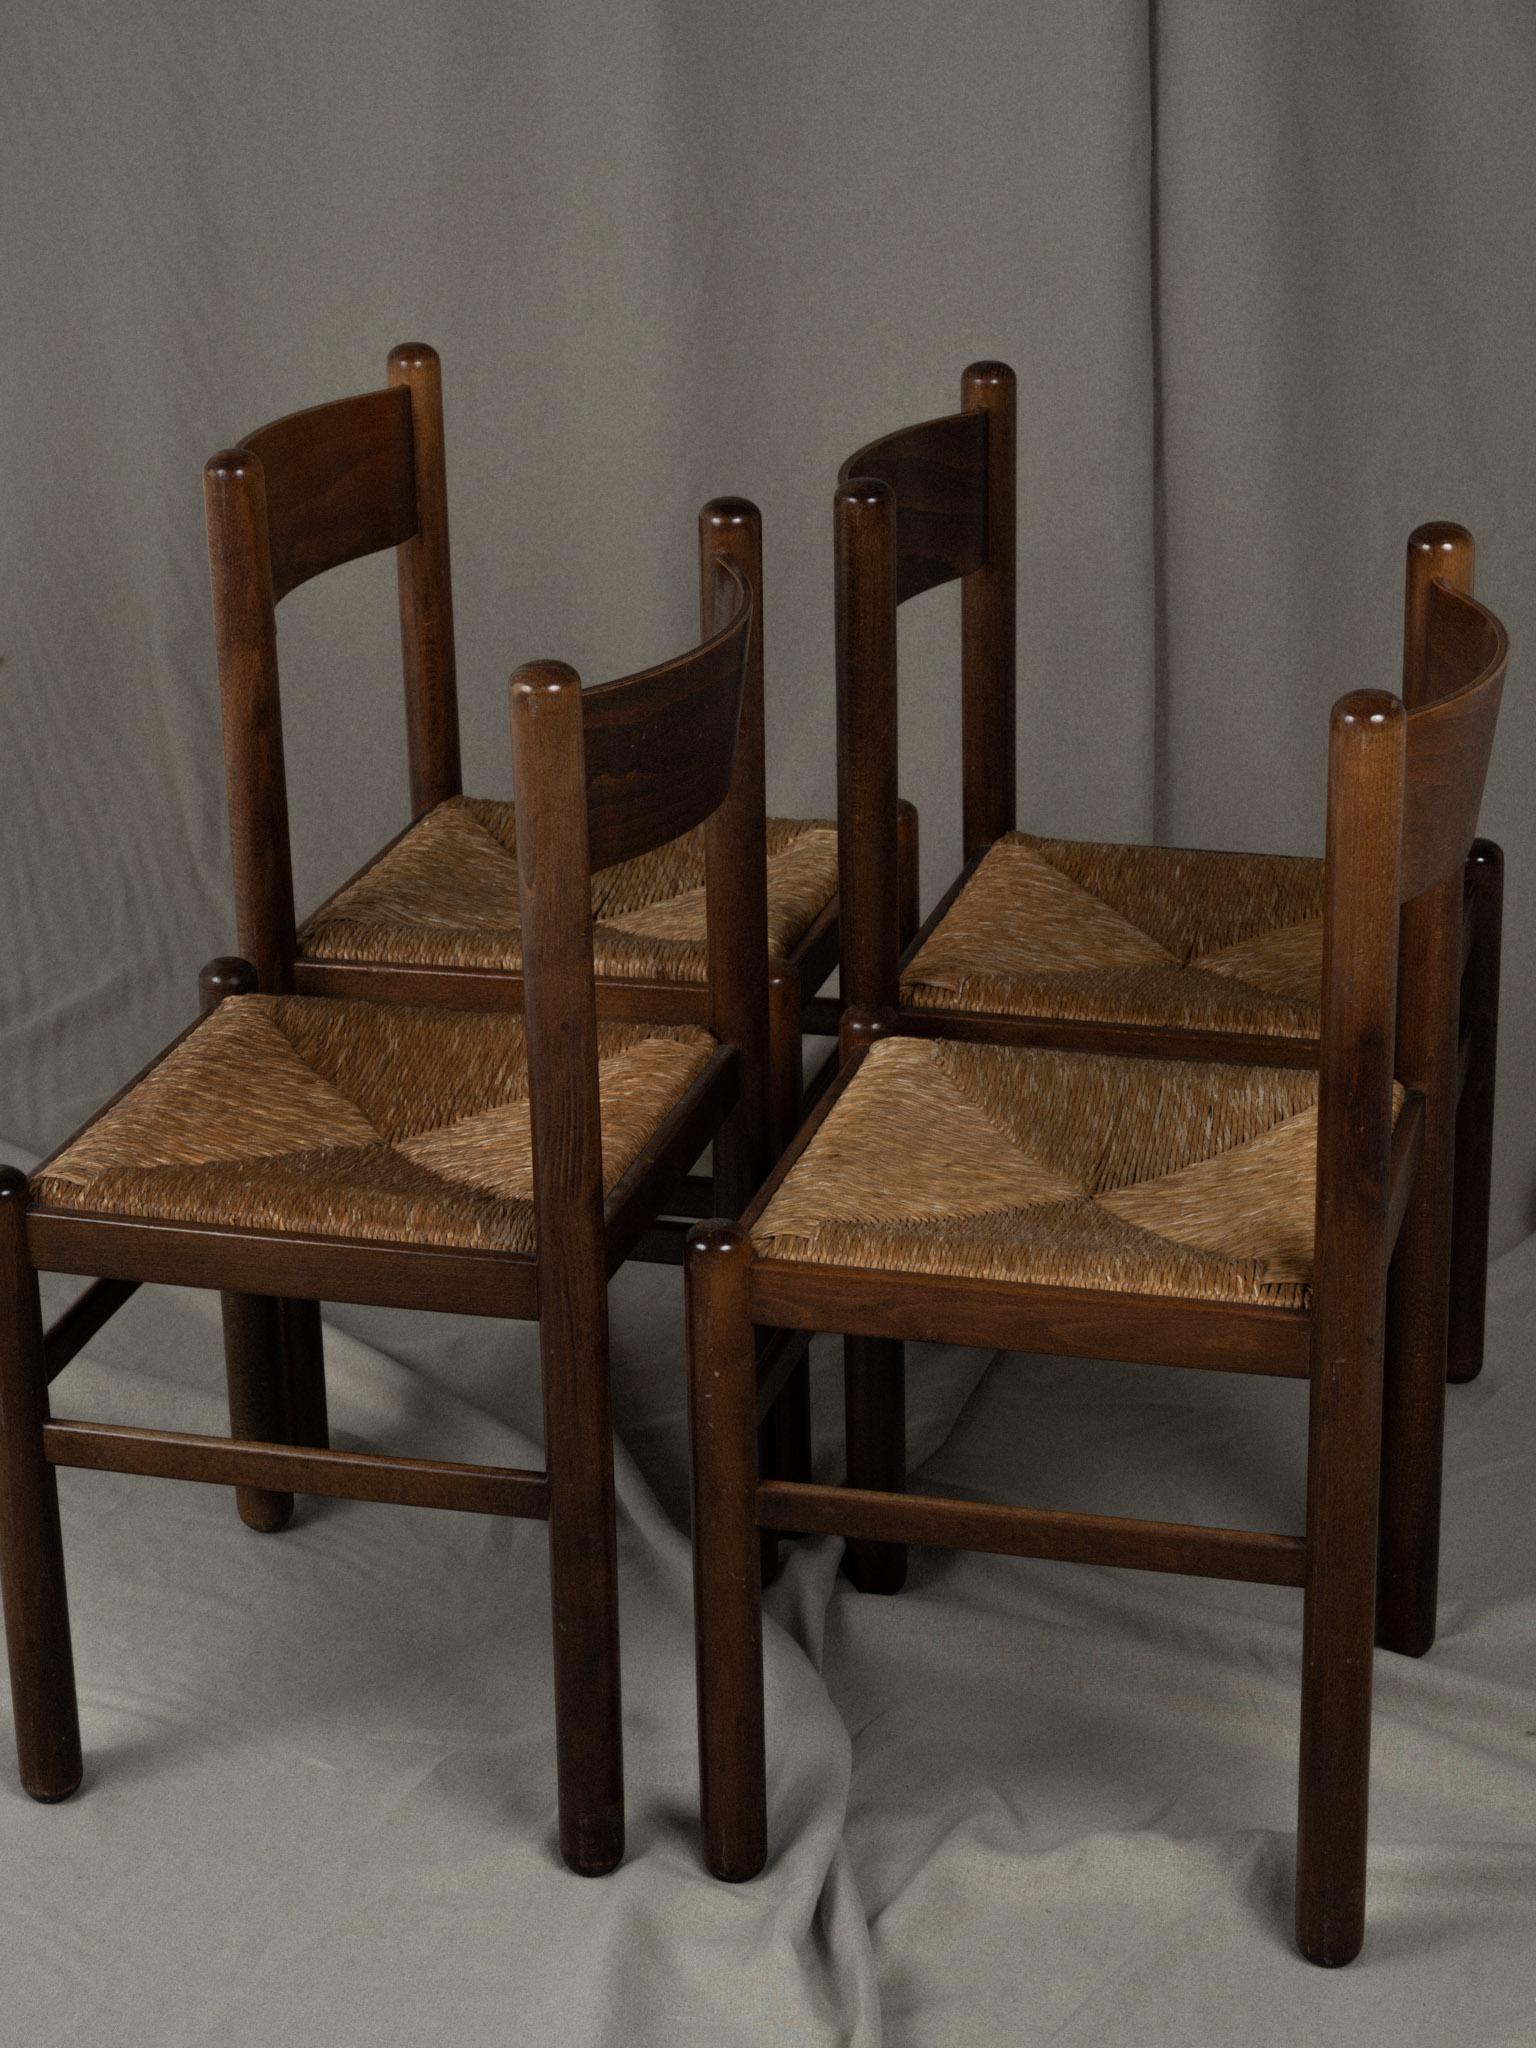 Beautiful set of 4 vintage dining chairs in the manner of Charlotte Perriand, circa 1970s. The chairs feature an open back with a horizontal slat design, showcasing a simple yet elegant style with a touch of modern aesthetics. Solid, dark brown